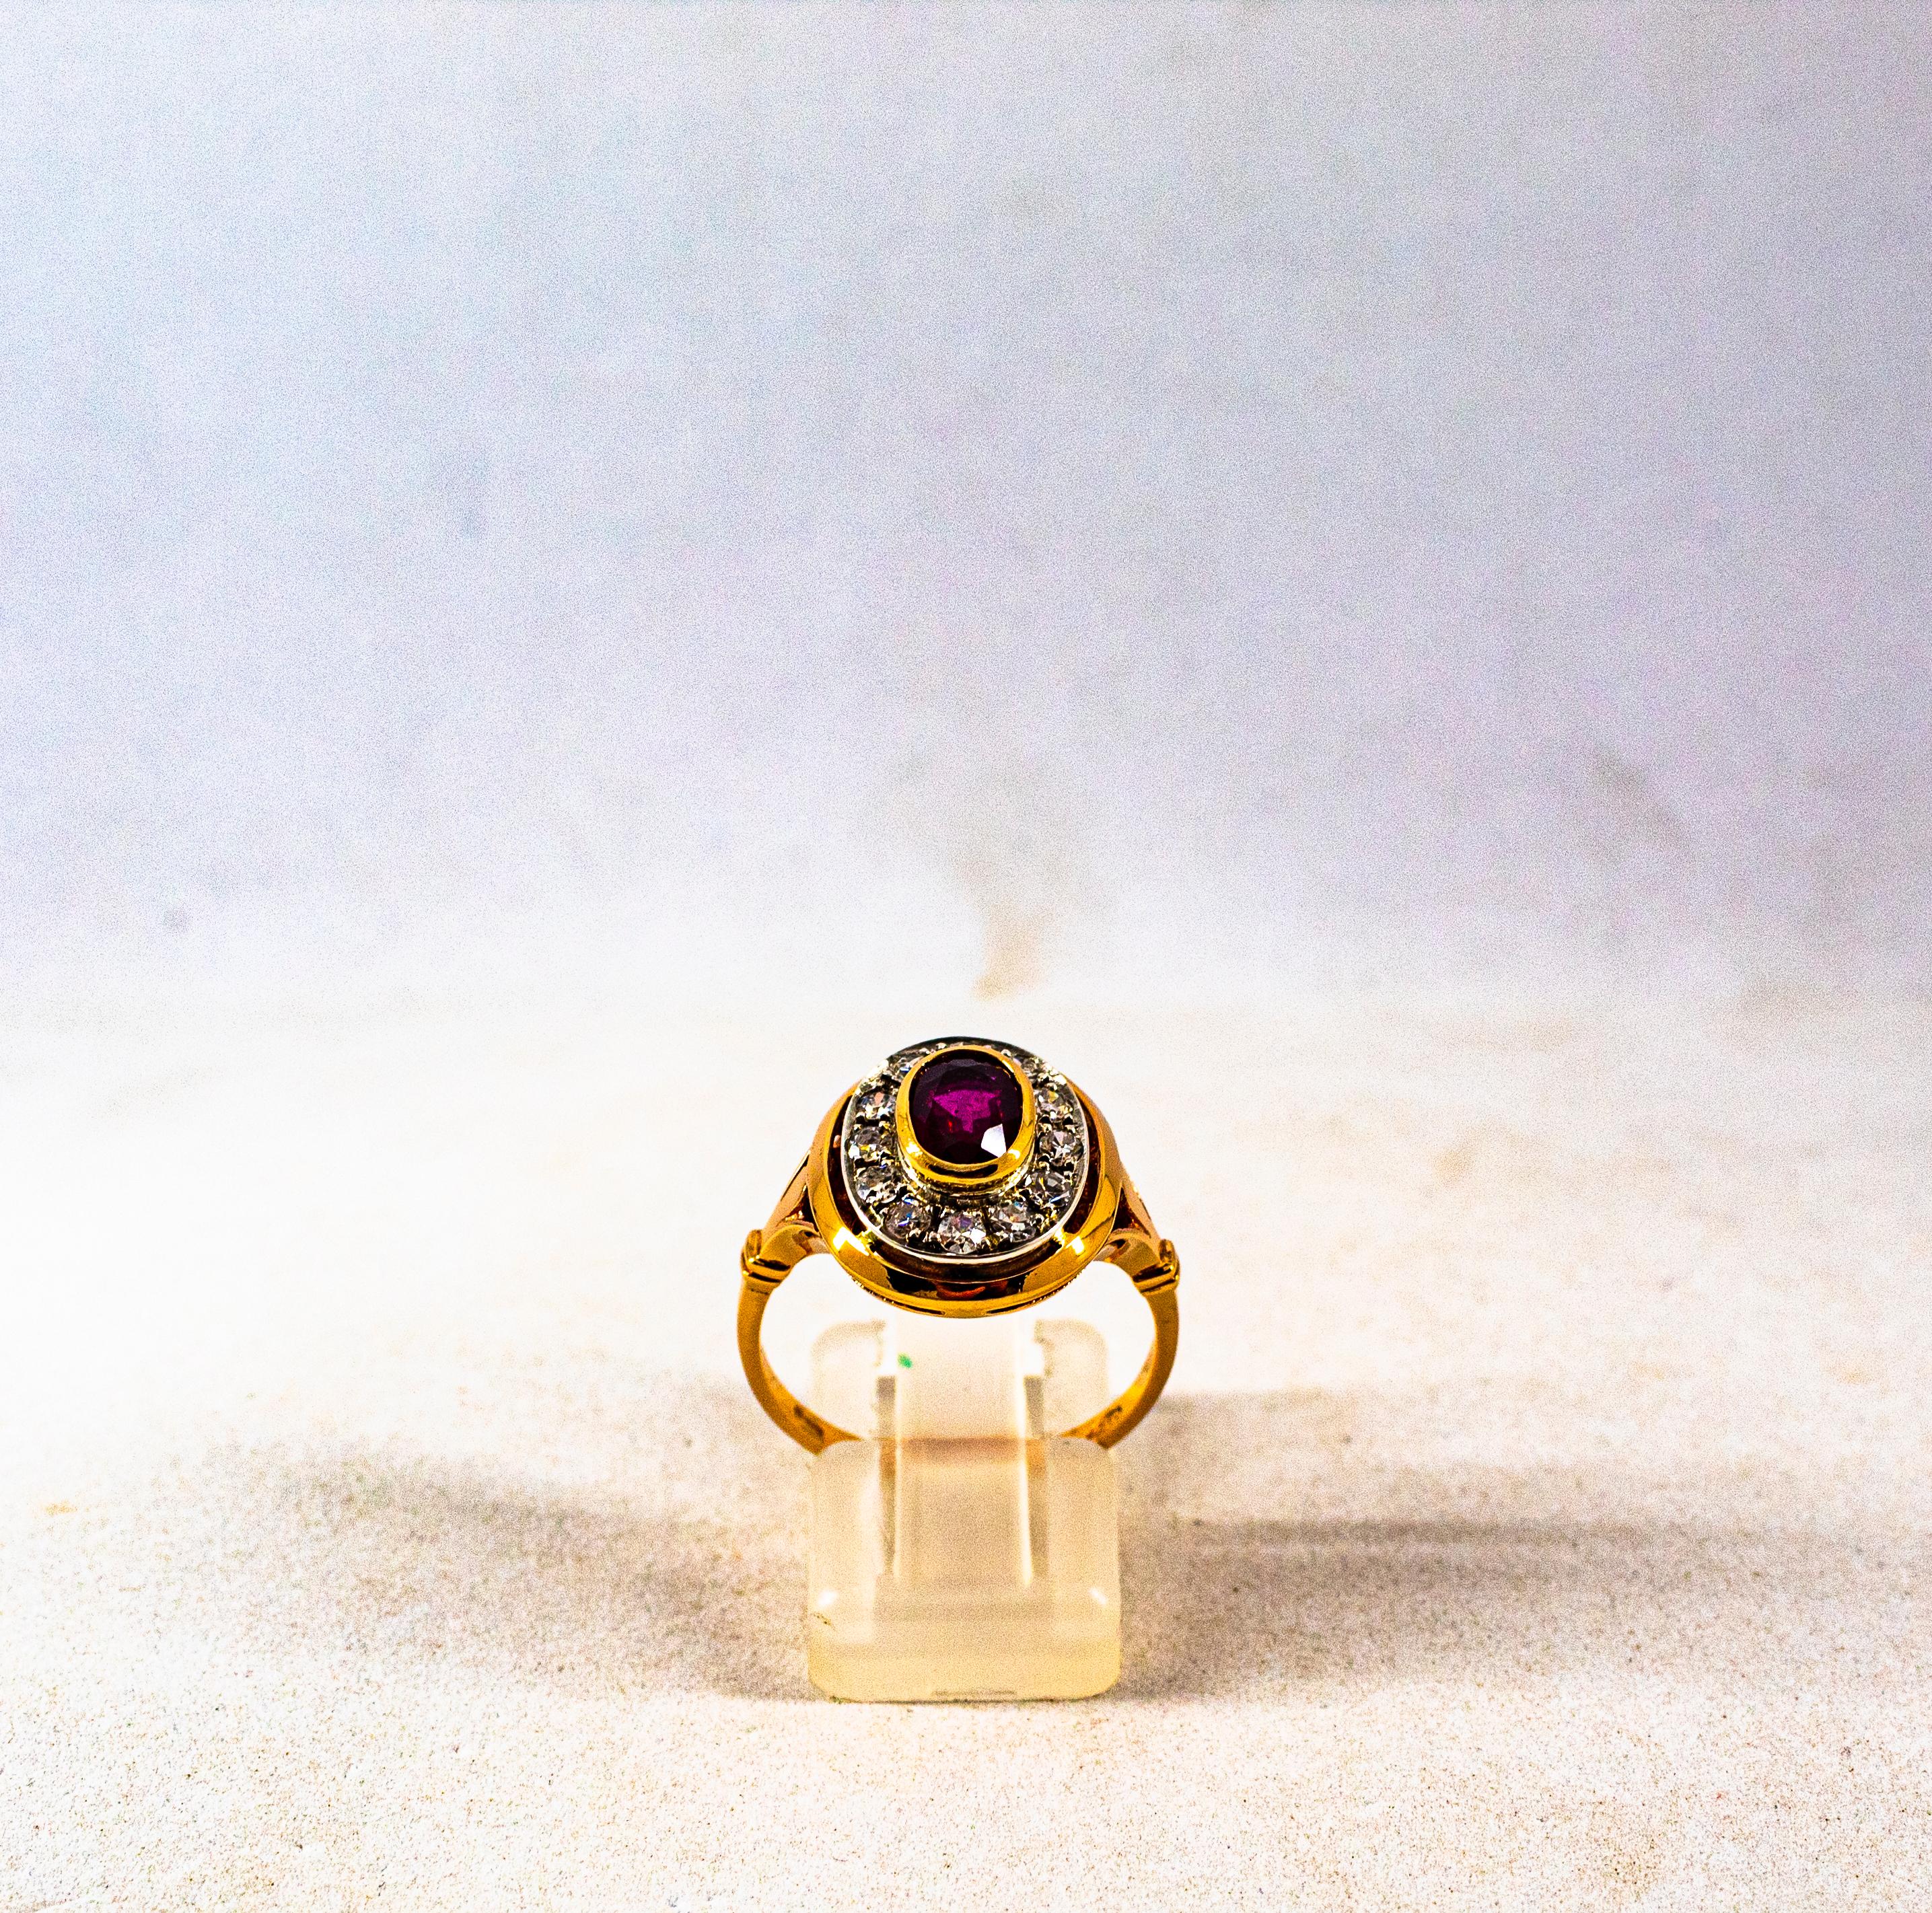 This Ring is made of 9K Yellow Gold and Sterling Silver.
This Ring has 0.30 Carats of White Brilliant Cut Diamonds.
This Ring has a 0.85 Carats Oval Cut Ruby.

This Ring is available also with a central Emerald or a central Blue Sapphire.
This Ring